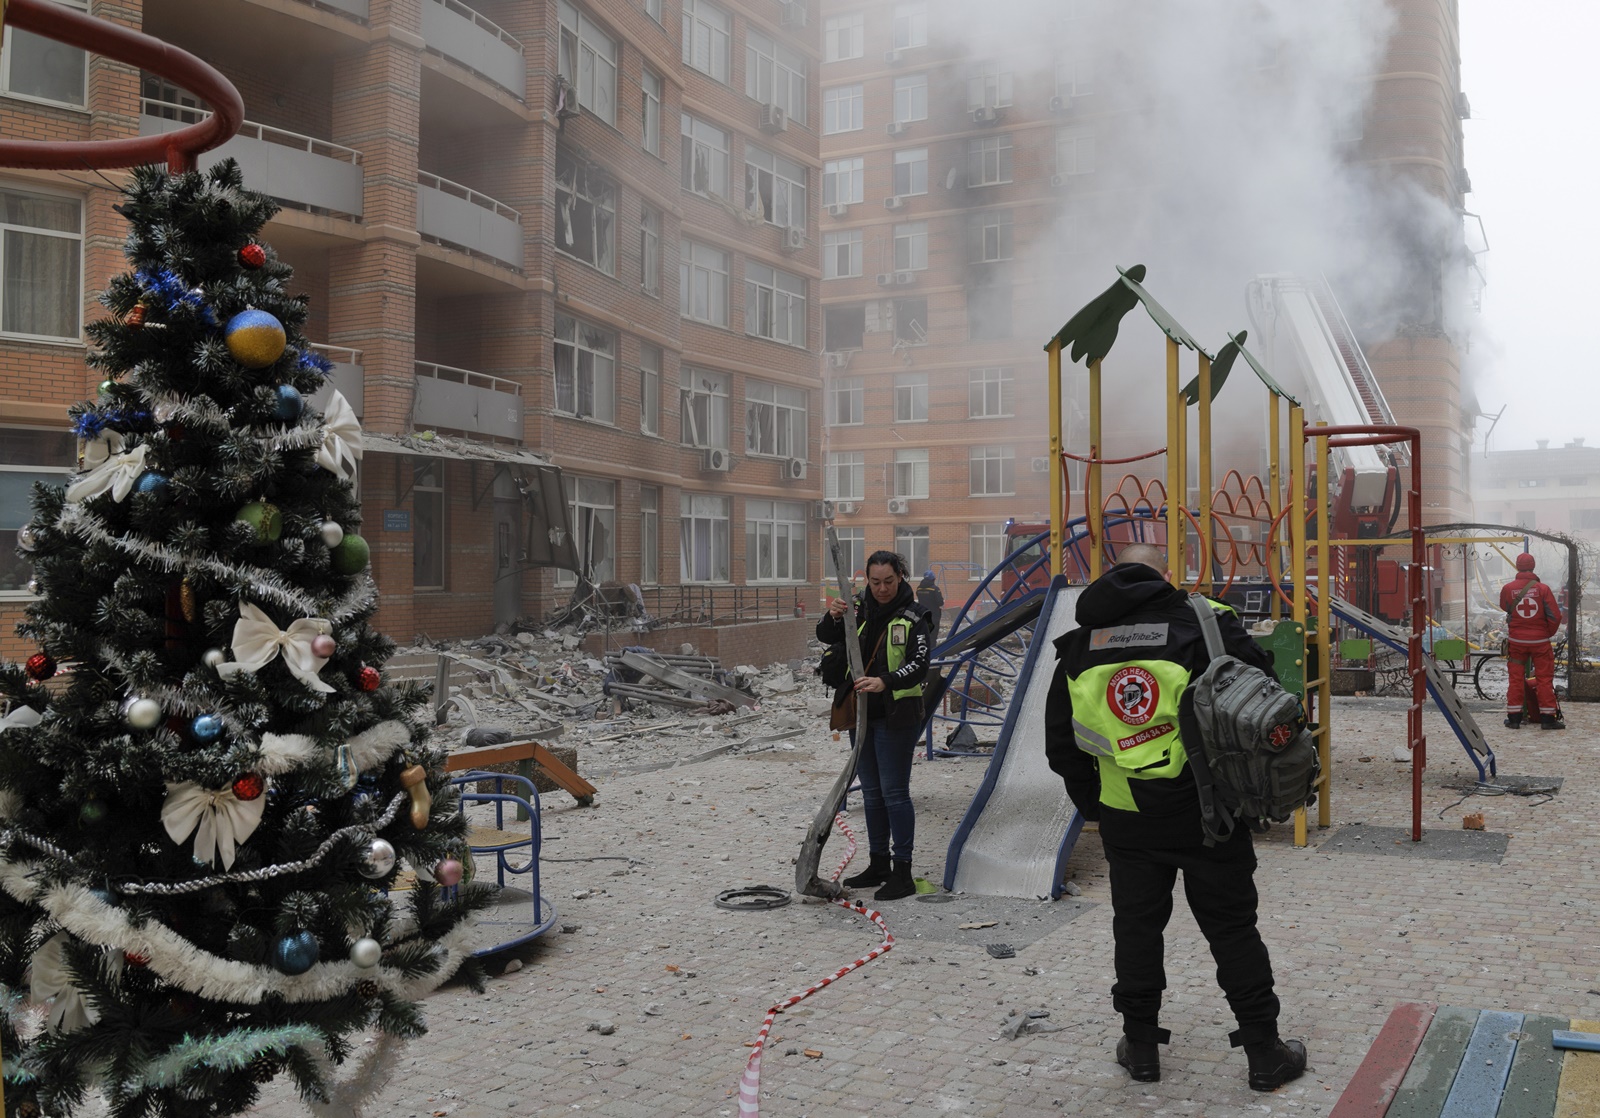 epa11048265 A Christmas tree near a playground as Ukrainian rescuers and police officers work at the site of a damaged residential building after shelling in Odesa, southwestern Ukraine, 29 December 2023, amid the Russian invasion. At least 18 people have died and over 130 were injured after Russia launched a wave of airstrikes across Ukraine, Ukraine's Ministry of Internal Affairs said on 29 December. Strikes were reported in Kyiv, Lviv, Odesa, Dnipro, Kharkiv, Zaporizhzhia, and other Ukrainian cities. Russia launched 'more than 150 missiles and combat drones' at Ukrainian cities, Ukraine's Prosecutor General Andriy Kostin said in a statement, adding that extensive damage included residential buildings, educational institutions and hospitals. Russian troops entered Ukraine on 24 February 2022 starting a conflict that has provoked destruction and a humanitarian crisis.  EPA/IHOR HORA